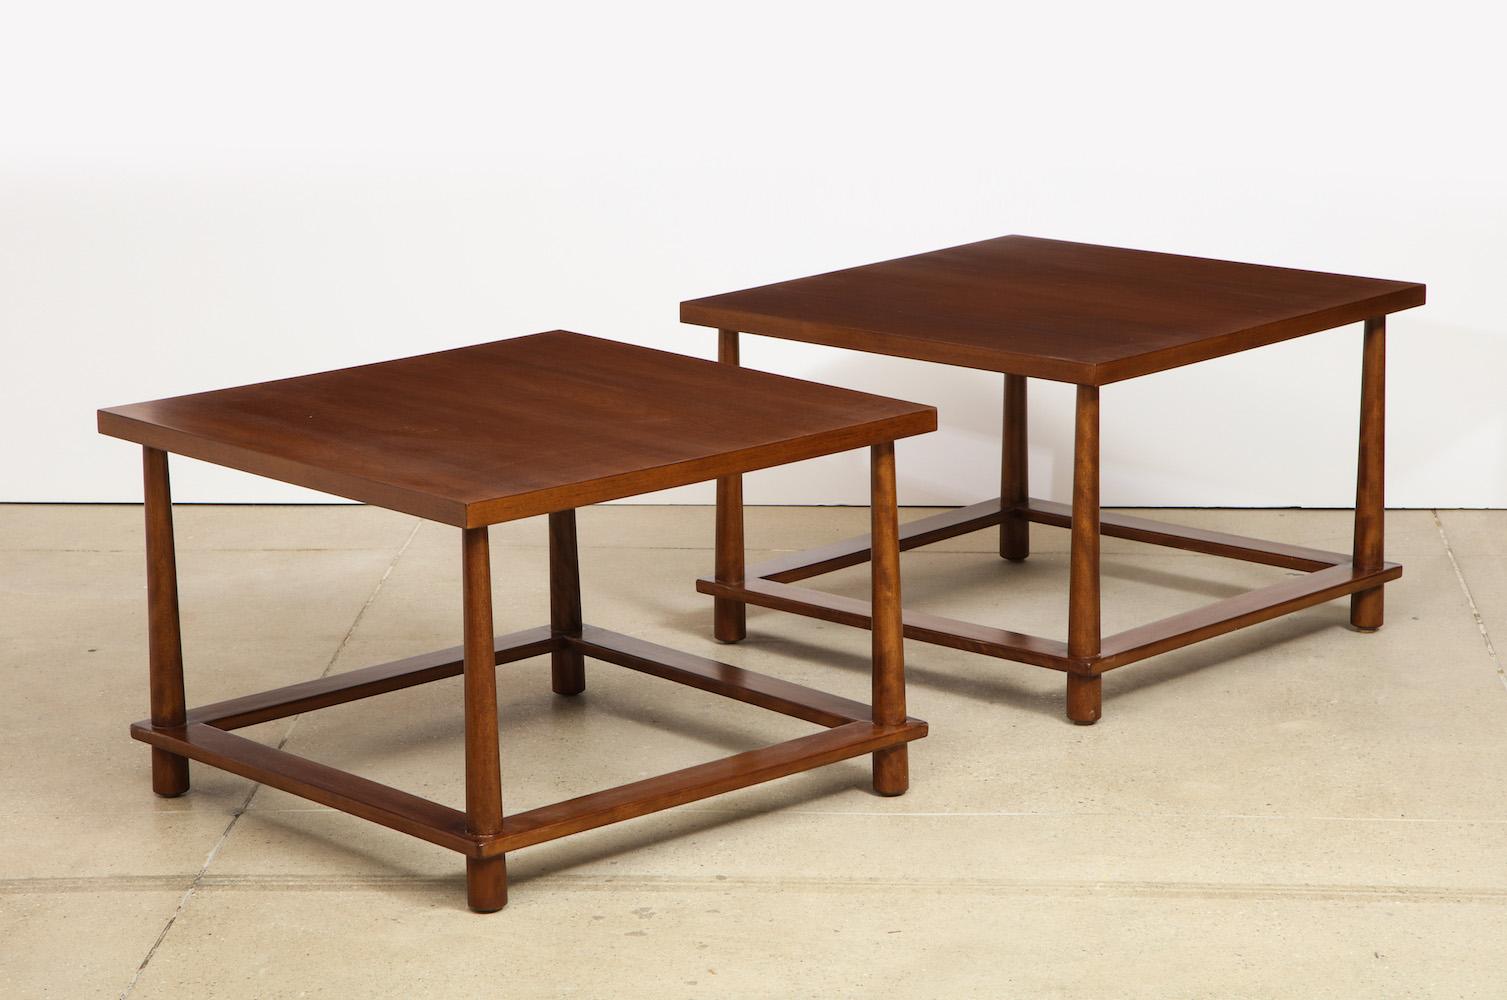 TH Robsjohn-Gibbings pair of large scale side tables. Figured walnut tables of square form featuring reverse-tapered legs and low stretchers. Manufactured by Widdicomb Furniture Company, these tables were only in production for a short period of